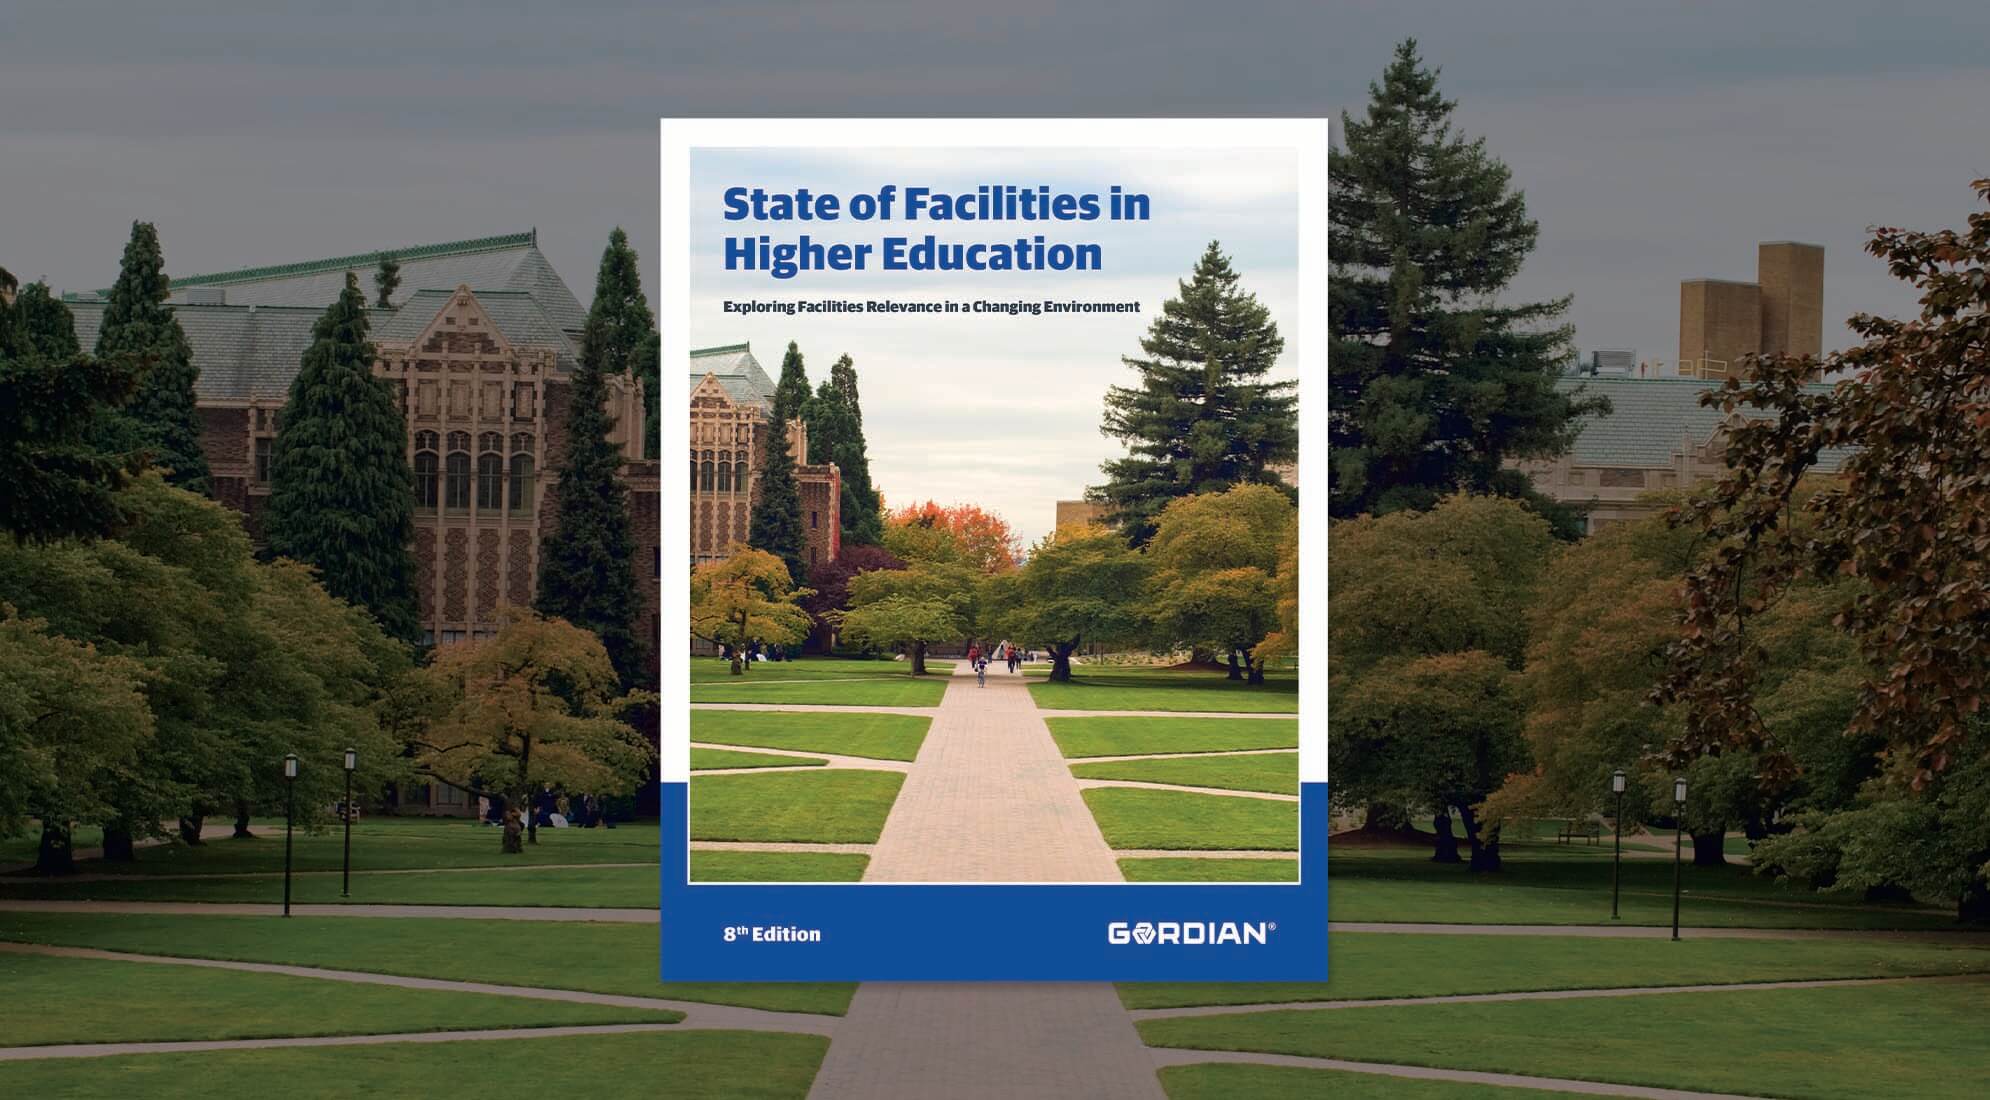 The State of Facilities in Higher Education, 8th Edition 2